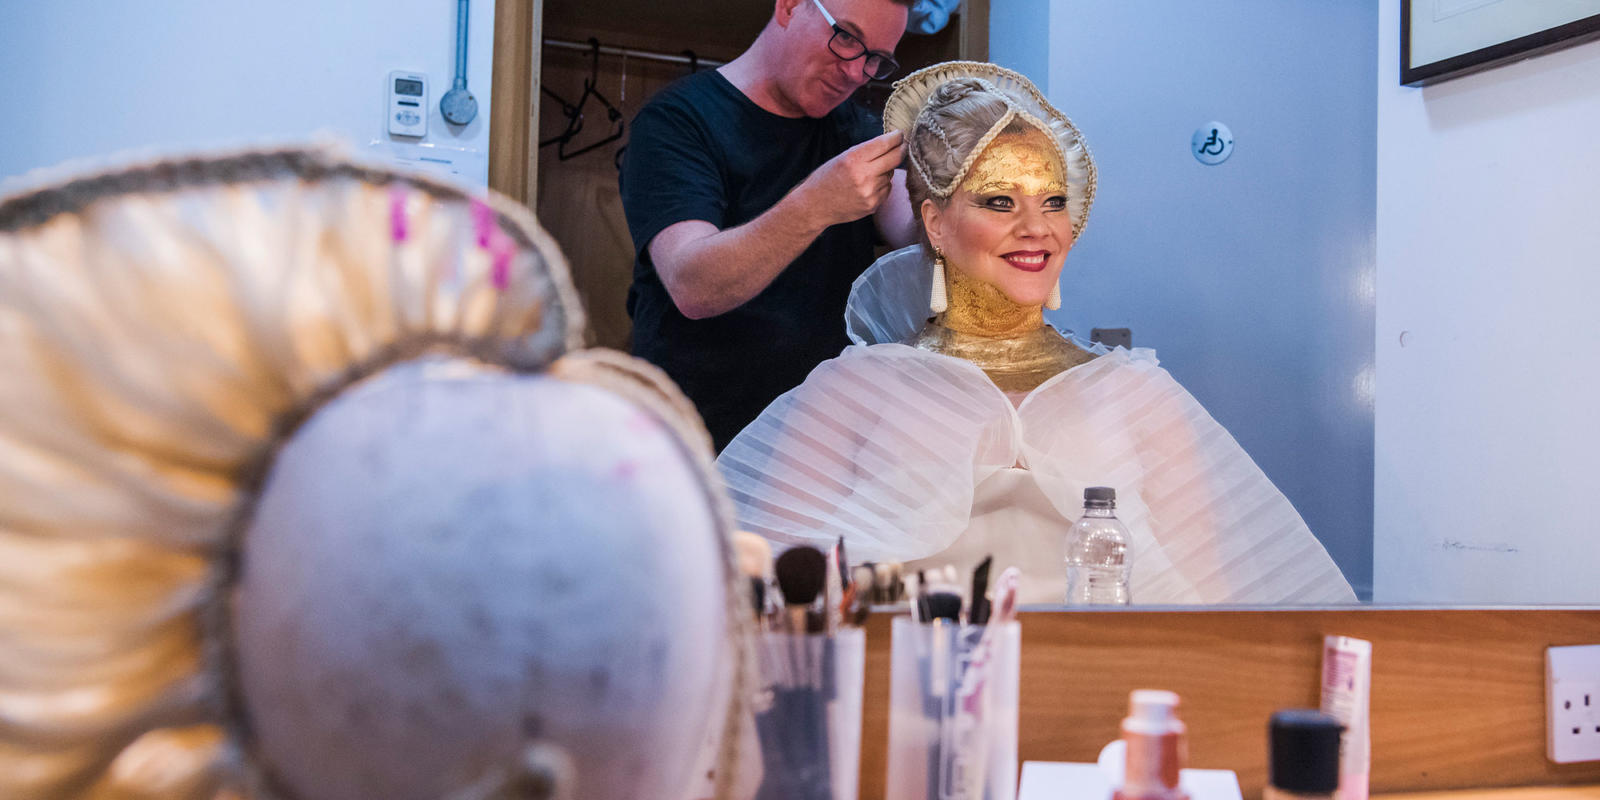 Michelle DeYoung getting ready backstage to sing the role of Amneris (c) Tristram Kenton